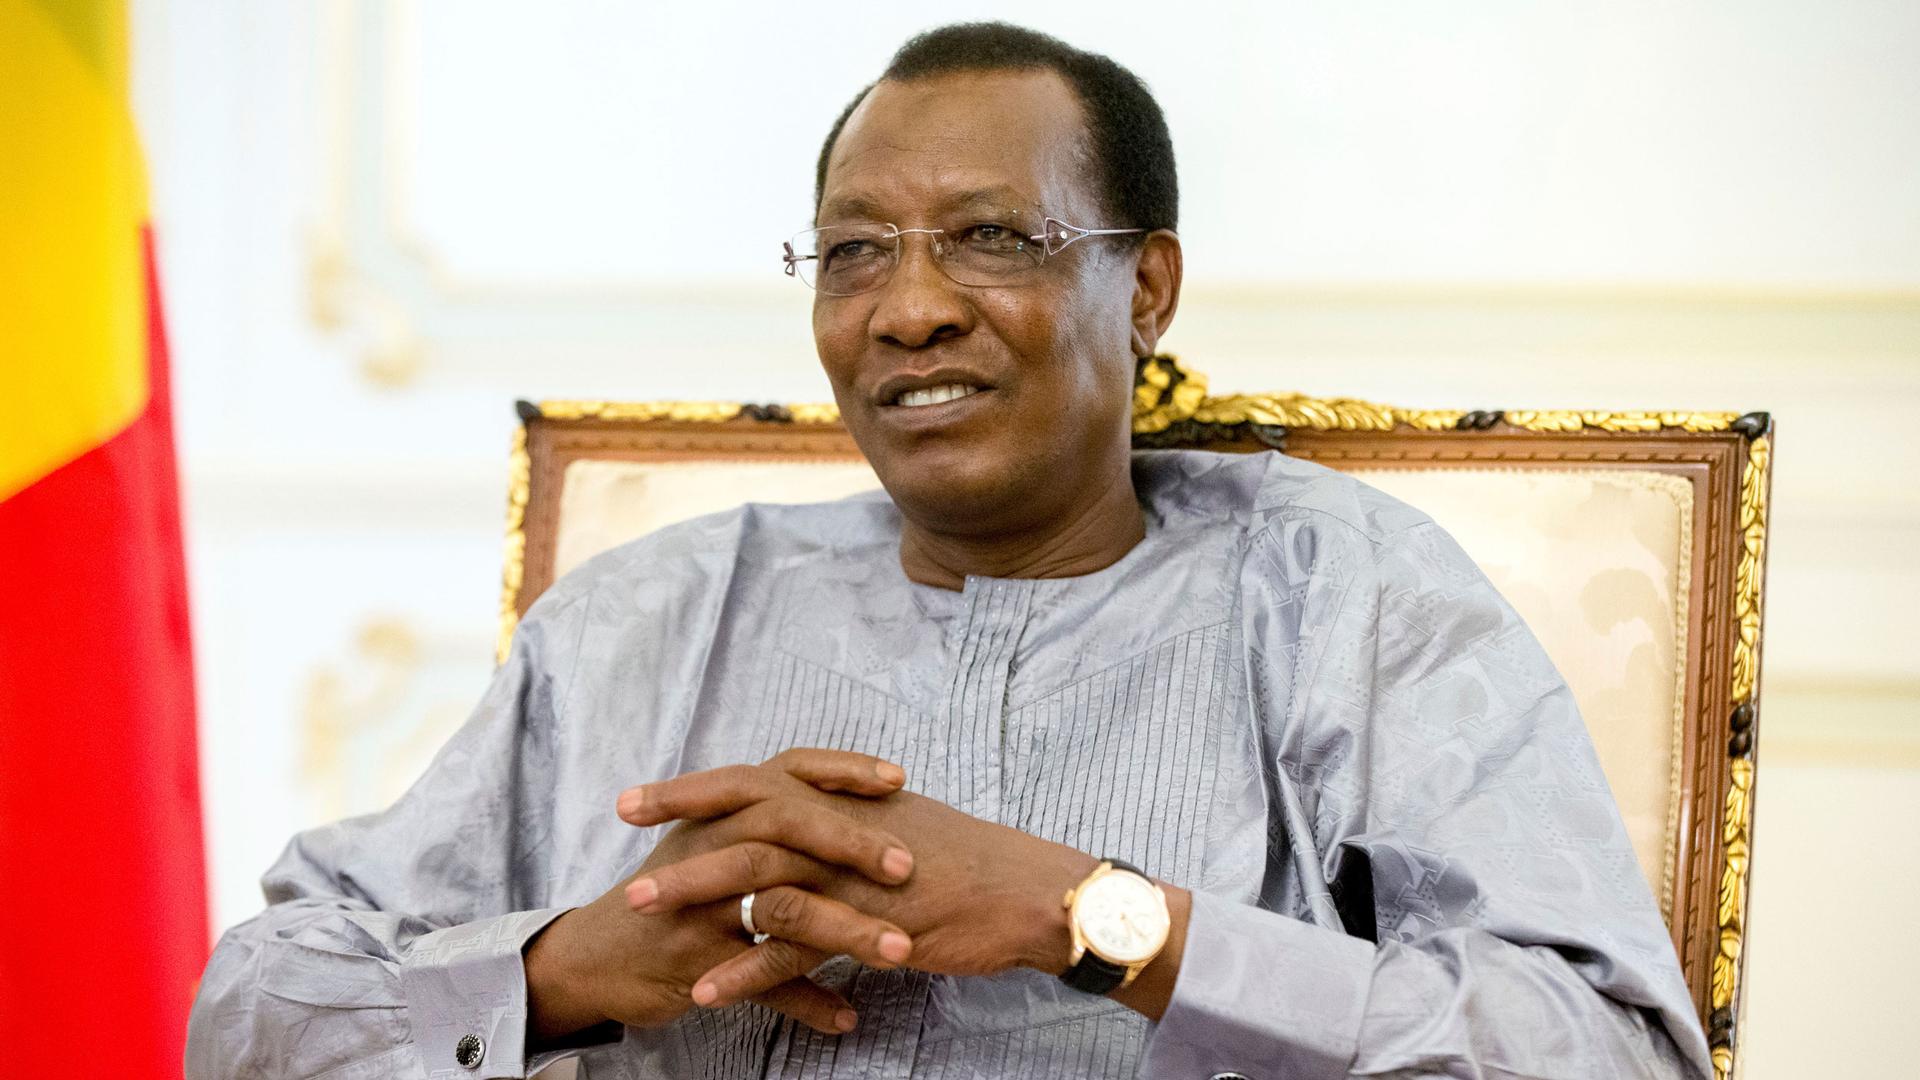 Chadian President Idriss Déby Itno is shown seated and with his hands folded.